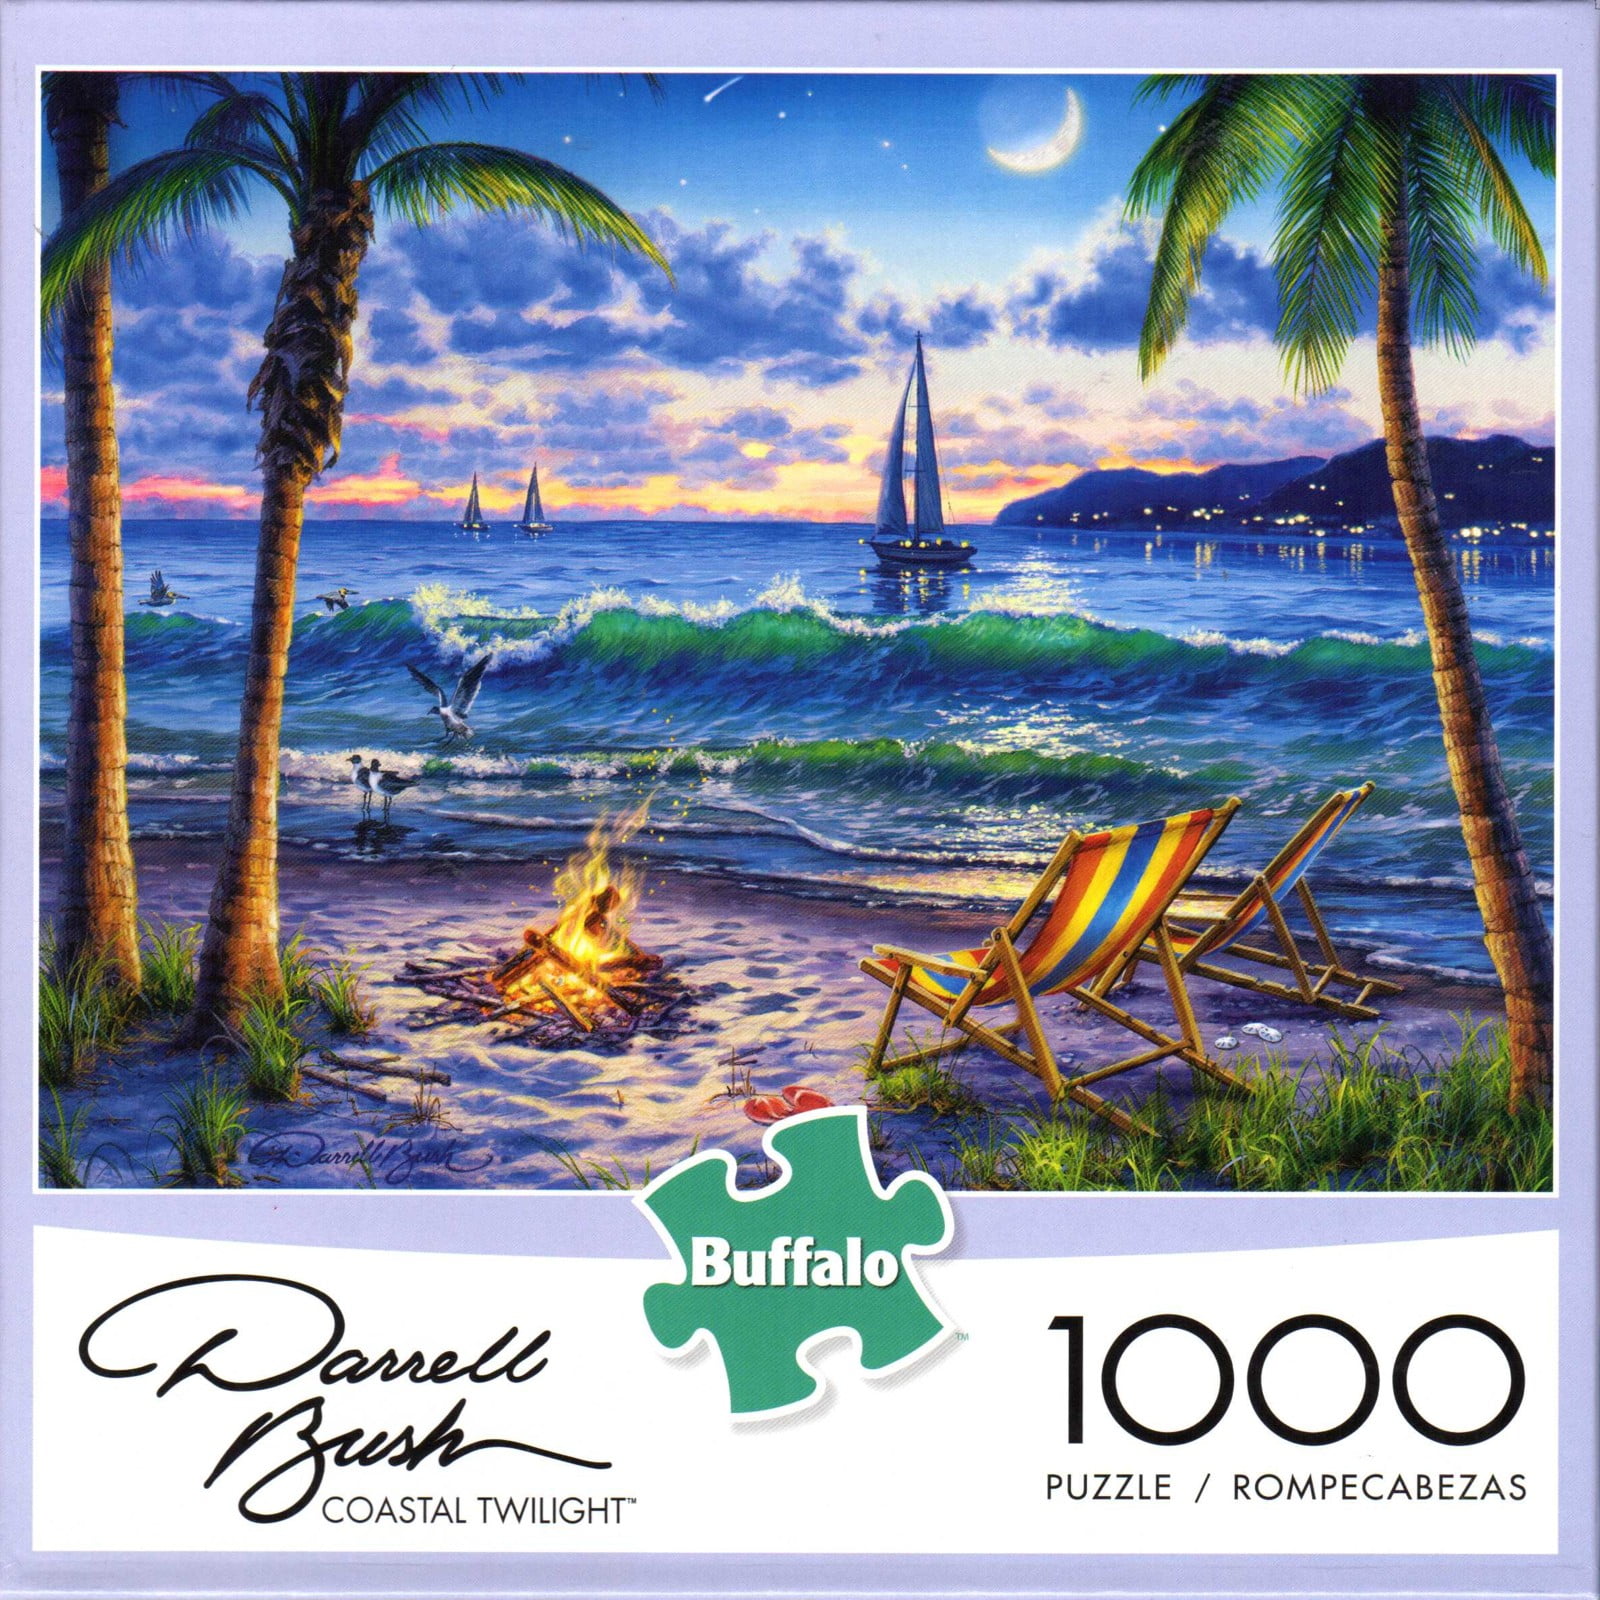 1000 Piece Jigsaw Puzzle Darrell Bush Moonlight Lodge Kids Adult Learning Game 